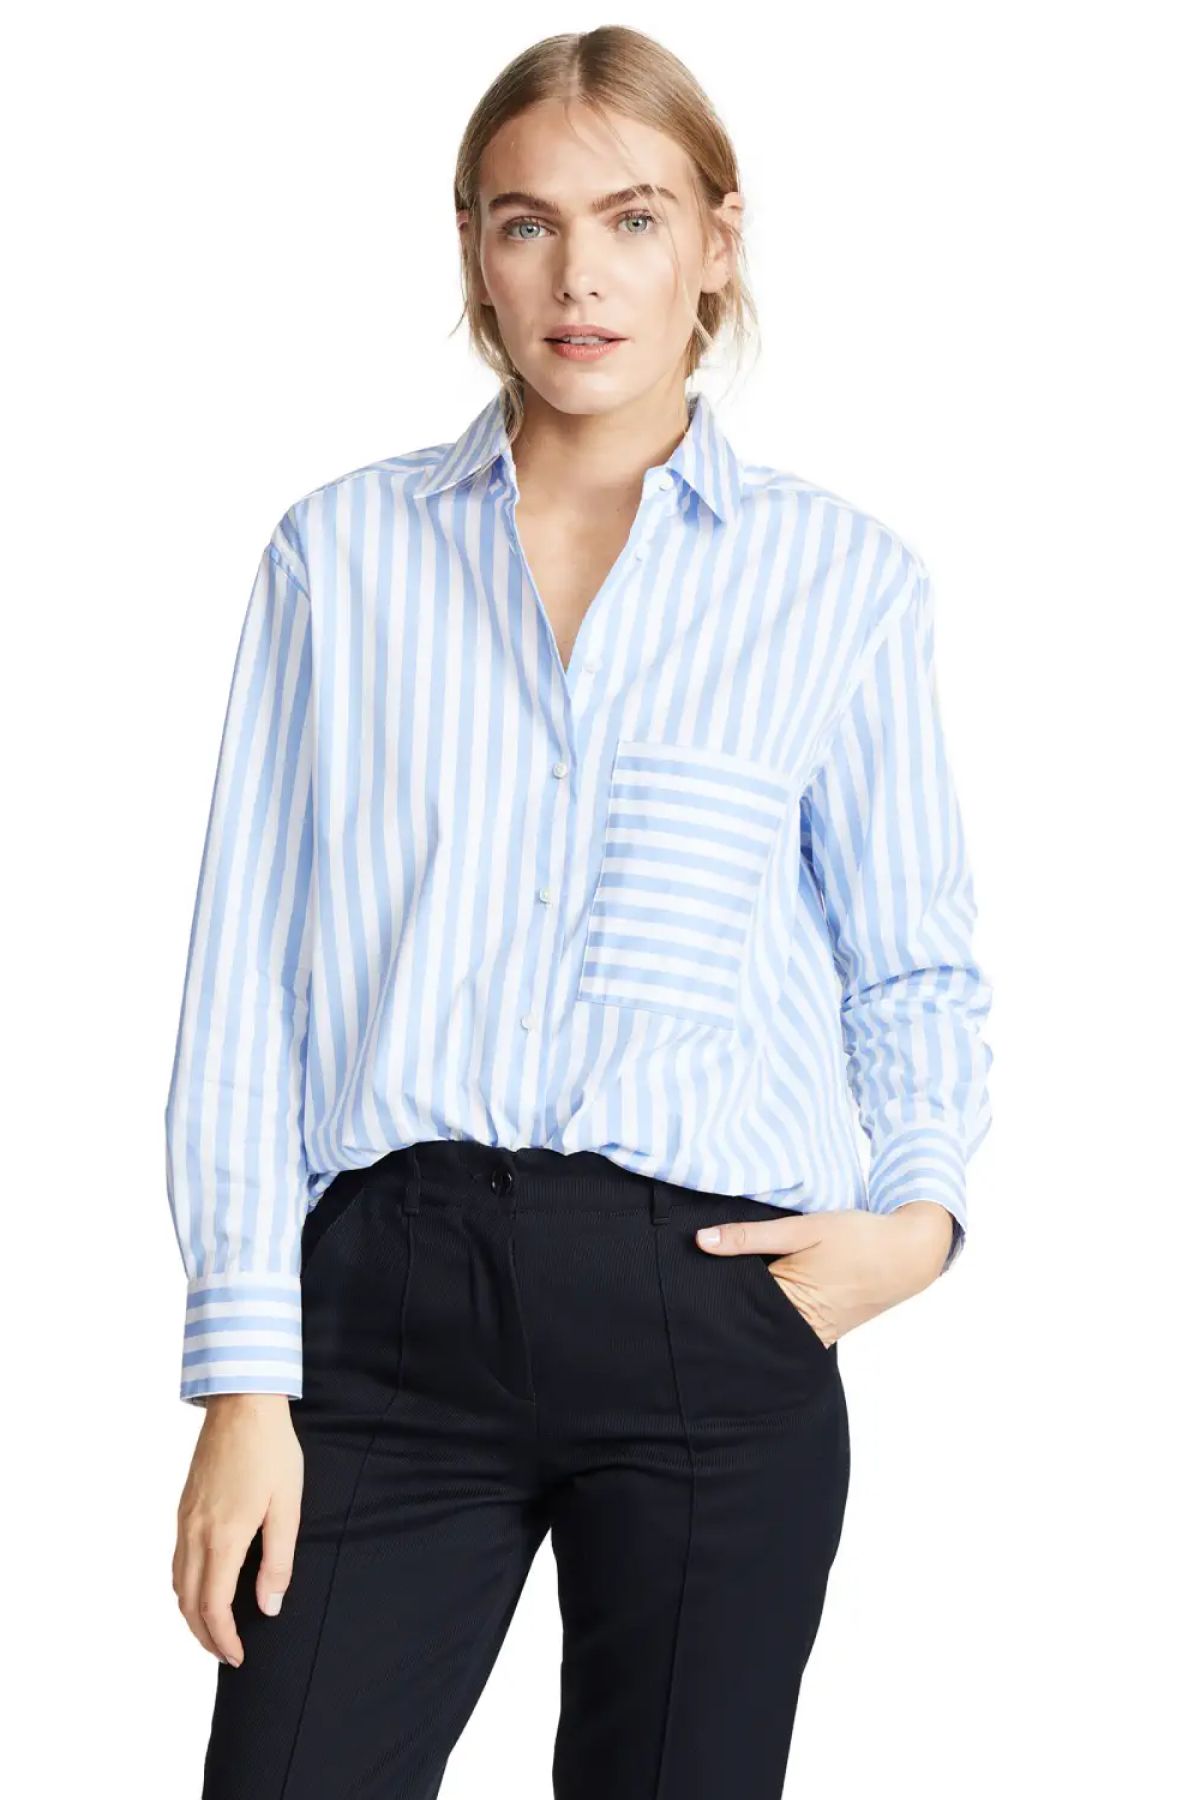 The 13 Best Button-Down Shirts for Women | Marie Claire